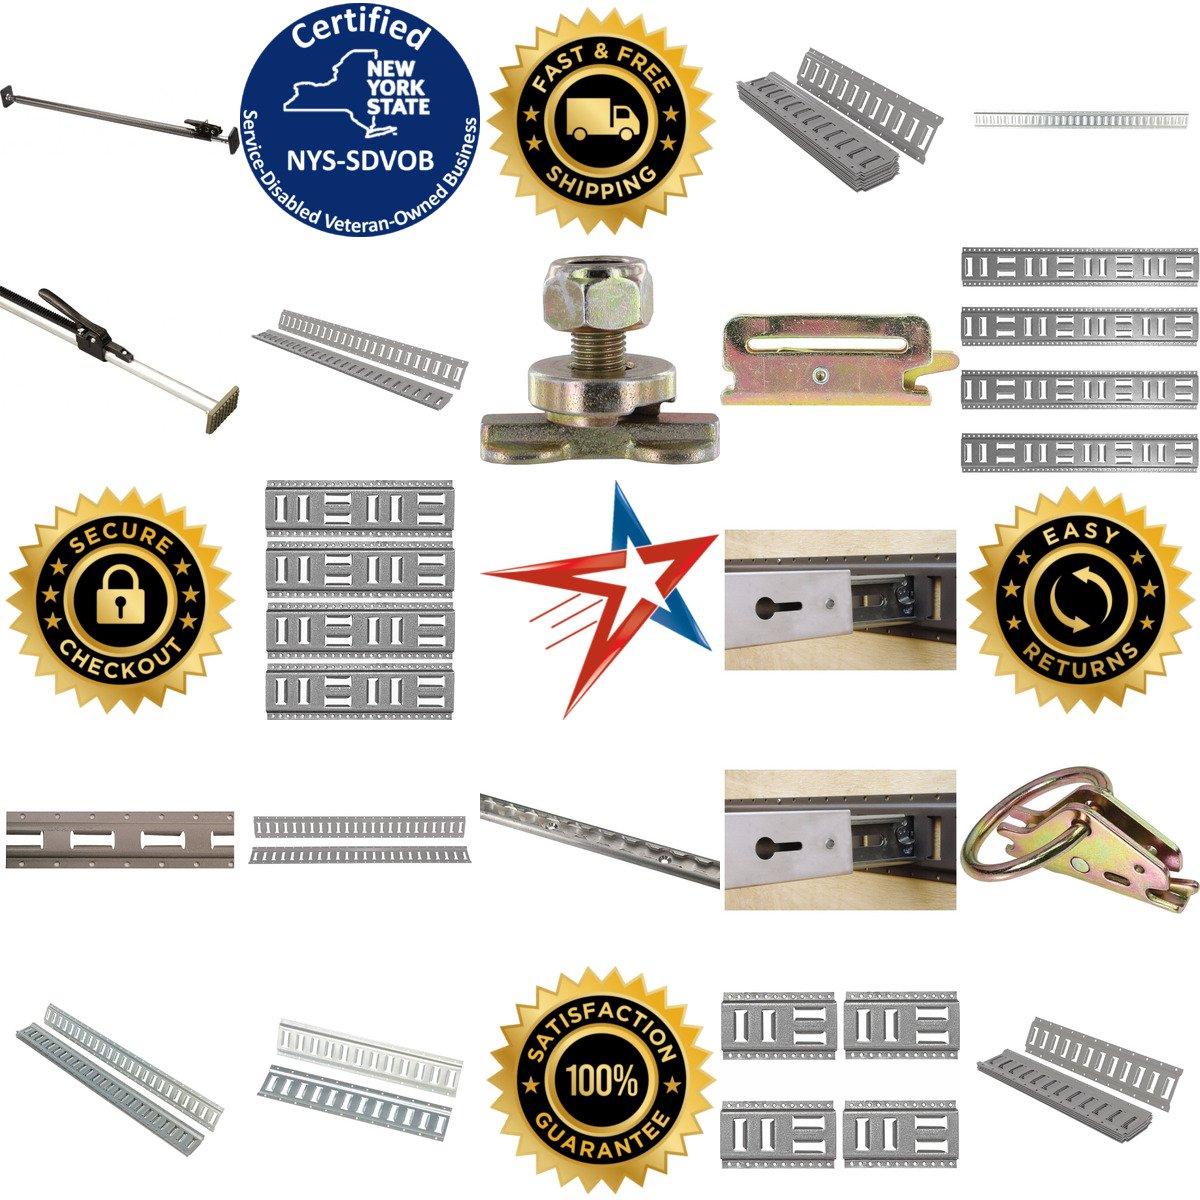 A selection of Trailer and Van Beams and Tracks products on GoVets